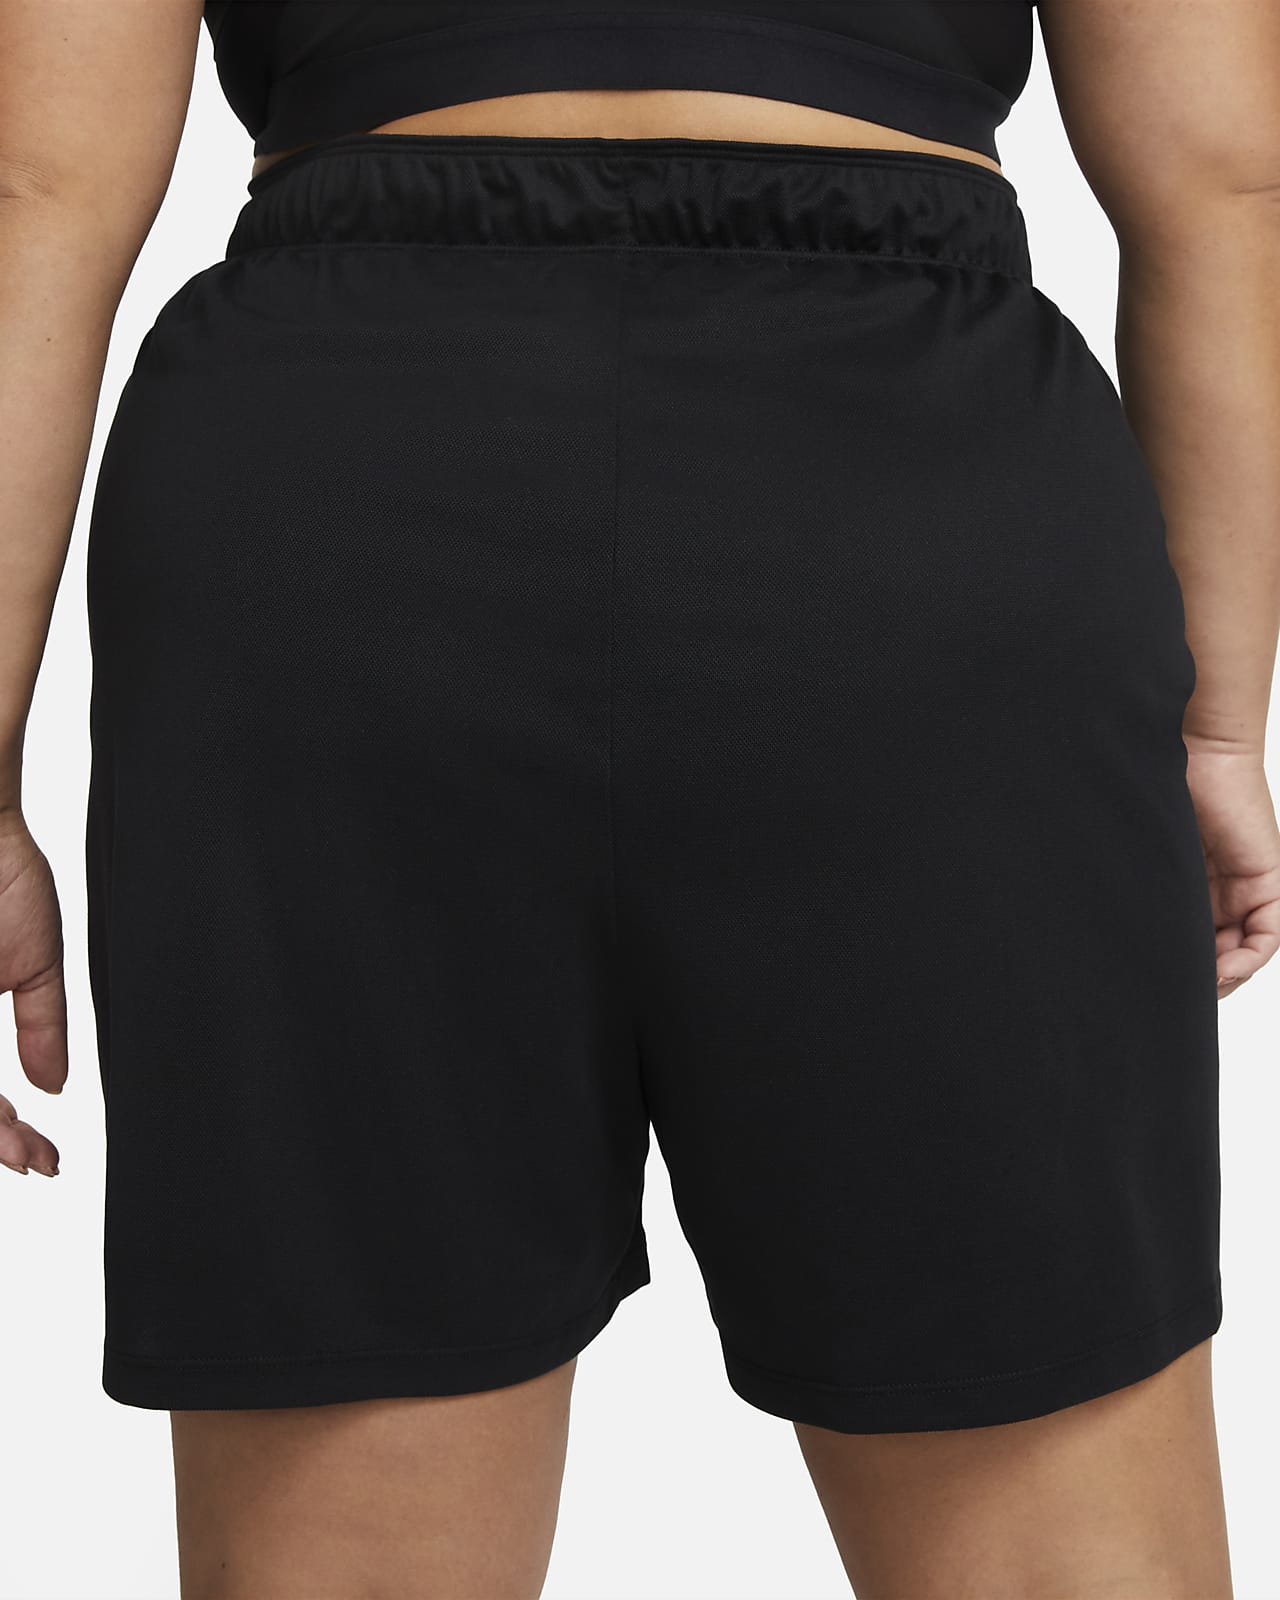 Nike Dri-Fit Women's Shorts With Built-in Underwear Size Large 